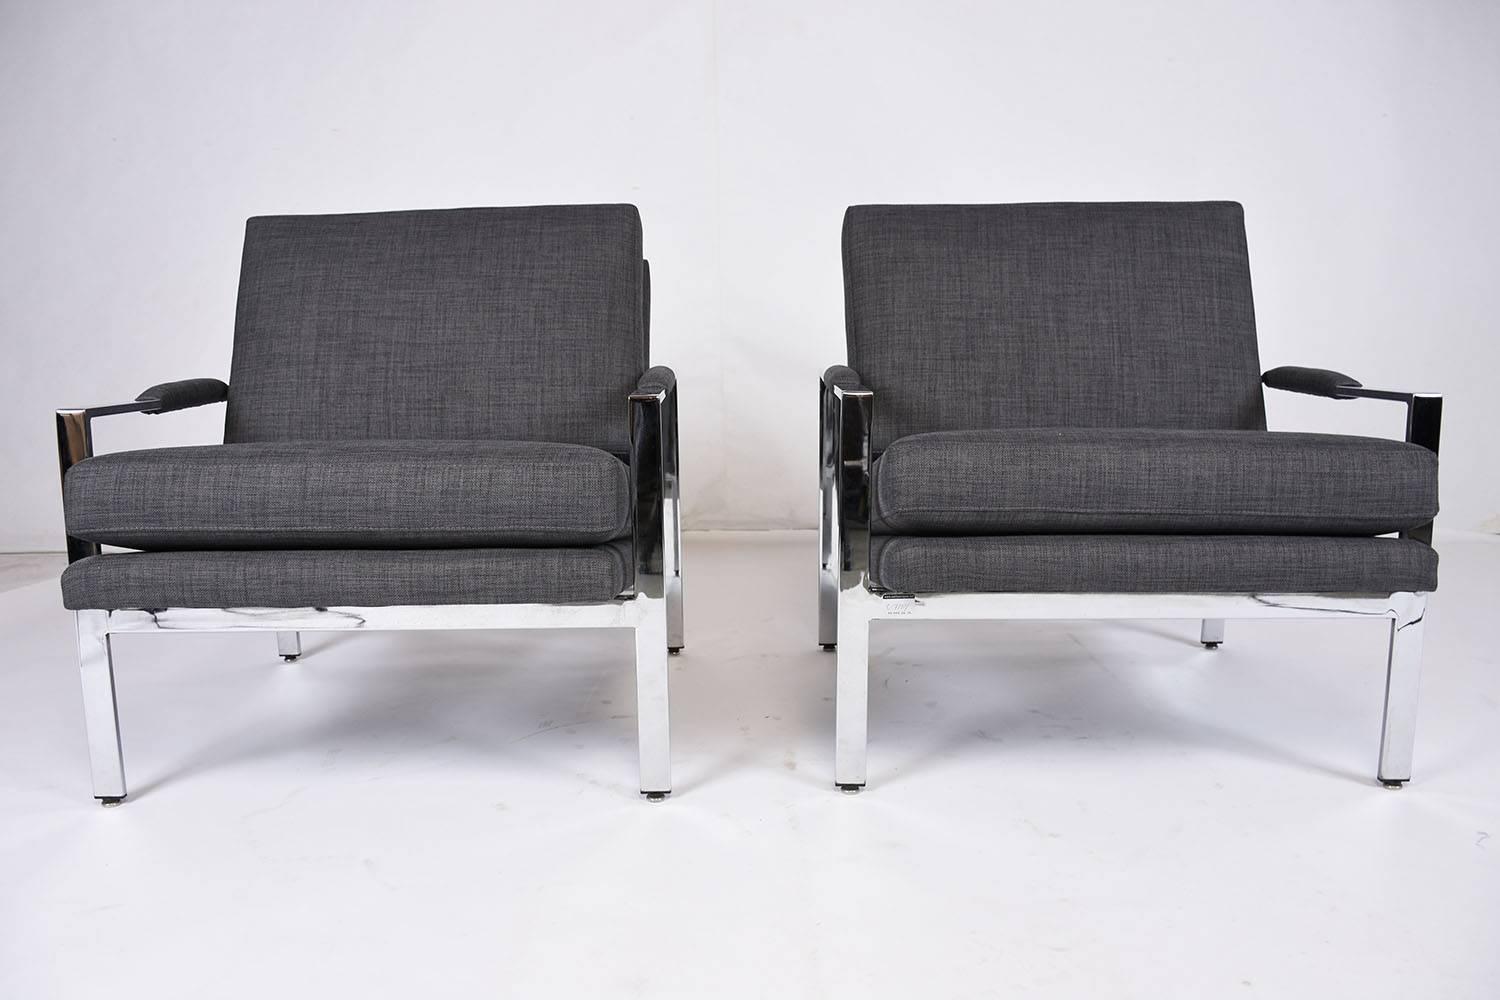 This 1970s Vintage pair of Mid-Century Modern-style lounge chairs are designed by Milo Baughman for Thayer Coggin. These stylish chairs feature minimalistic chromed steel frames with padded armrest. The comfortable seats have been professionally